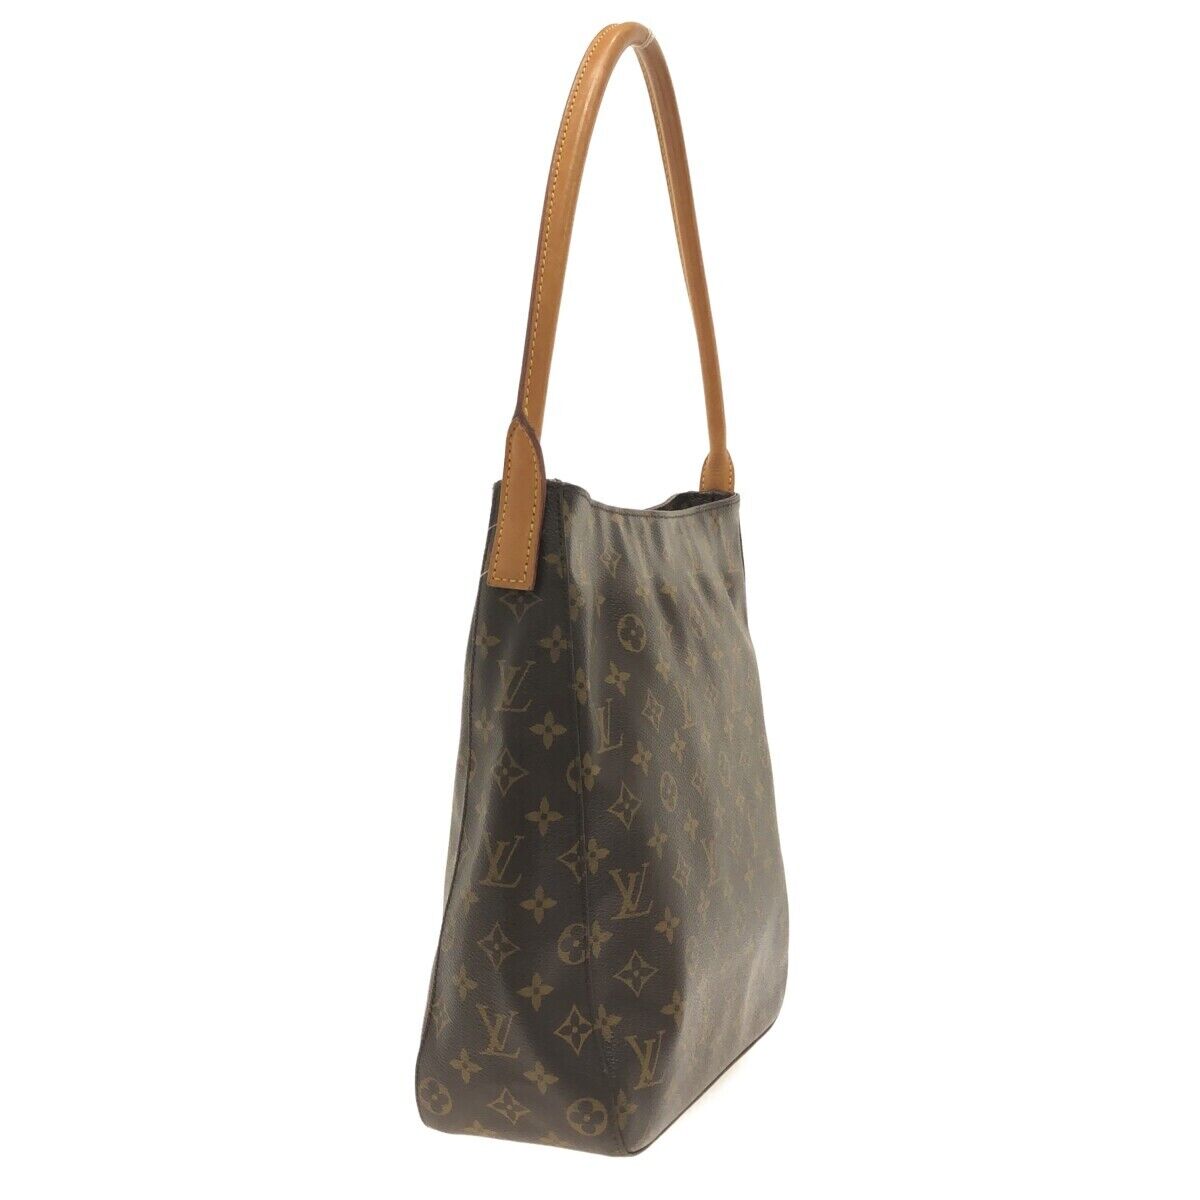 Authenticated Used LOUIS VUITTON Looping GM Shoulder Bag Monogram M51145 